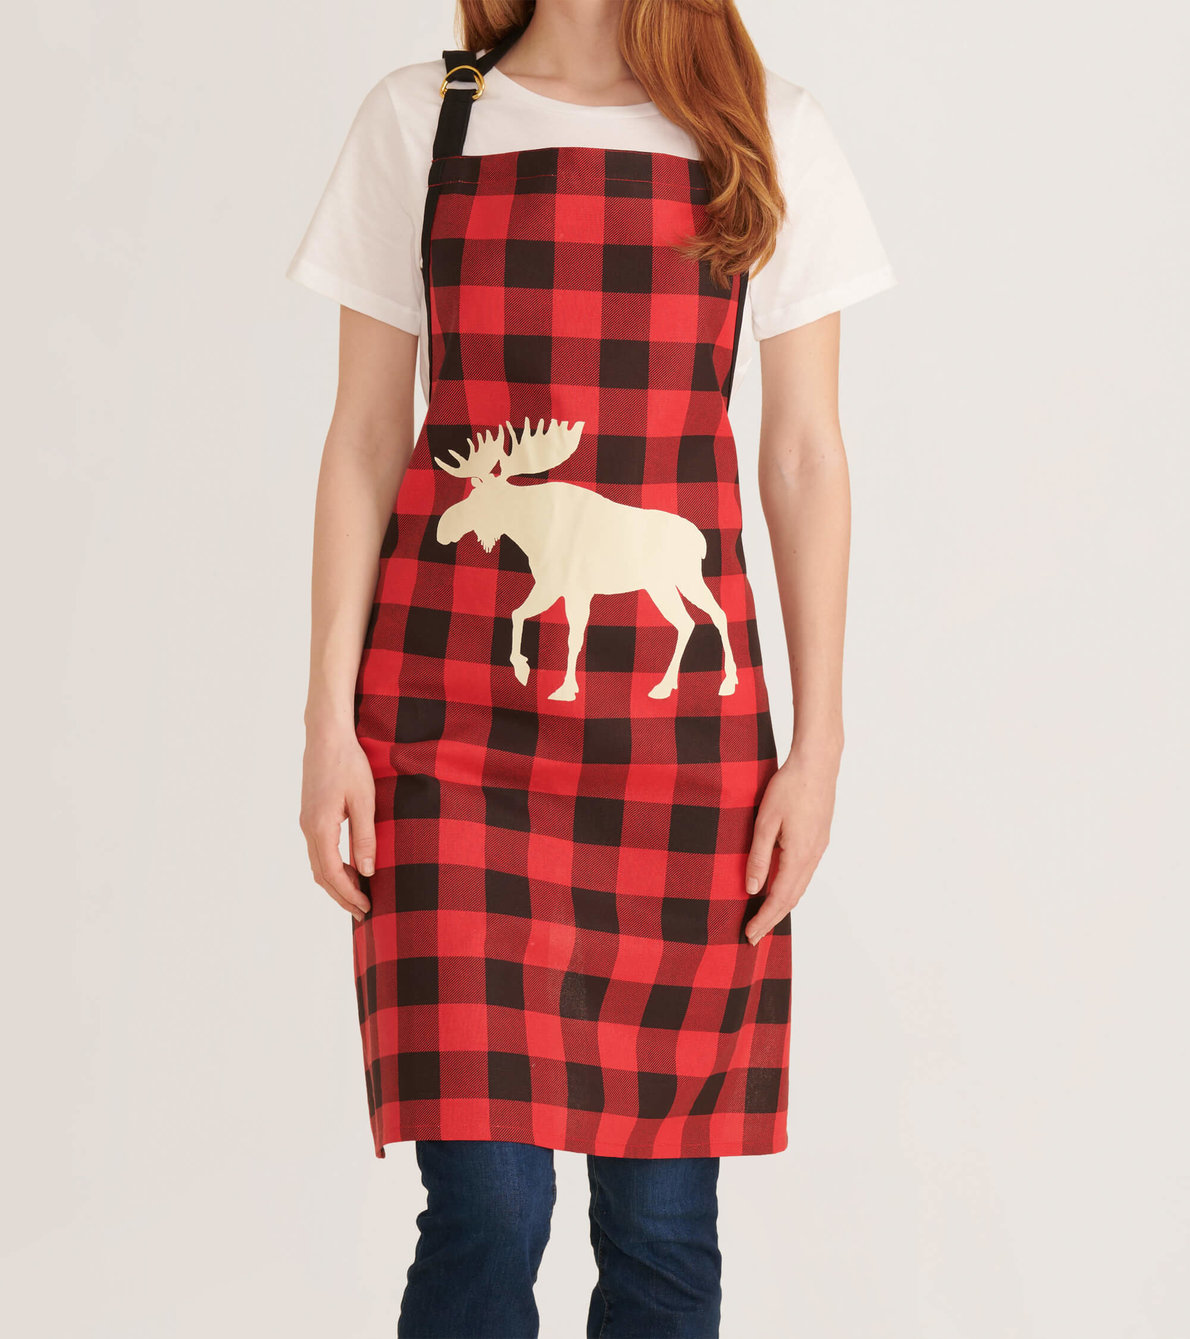 View larger image of Moose on Plaid Apron